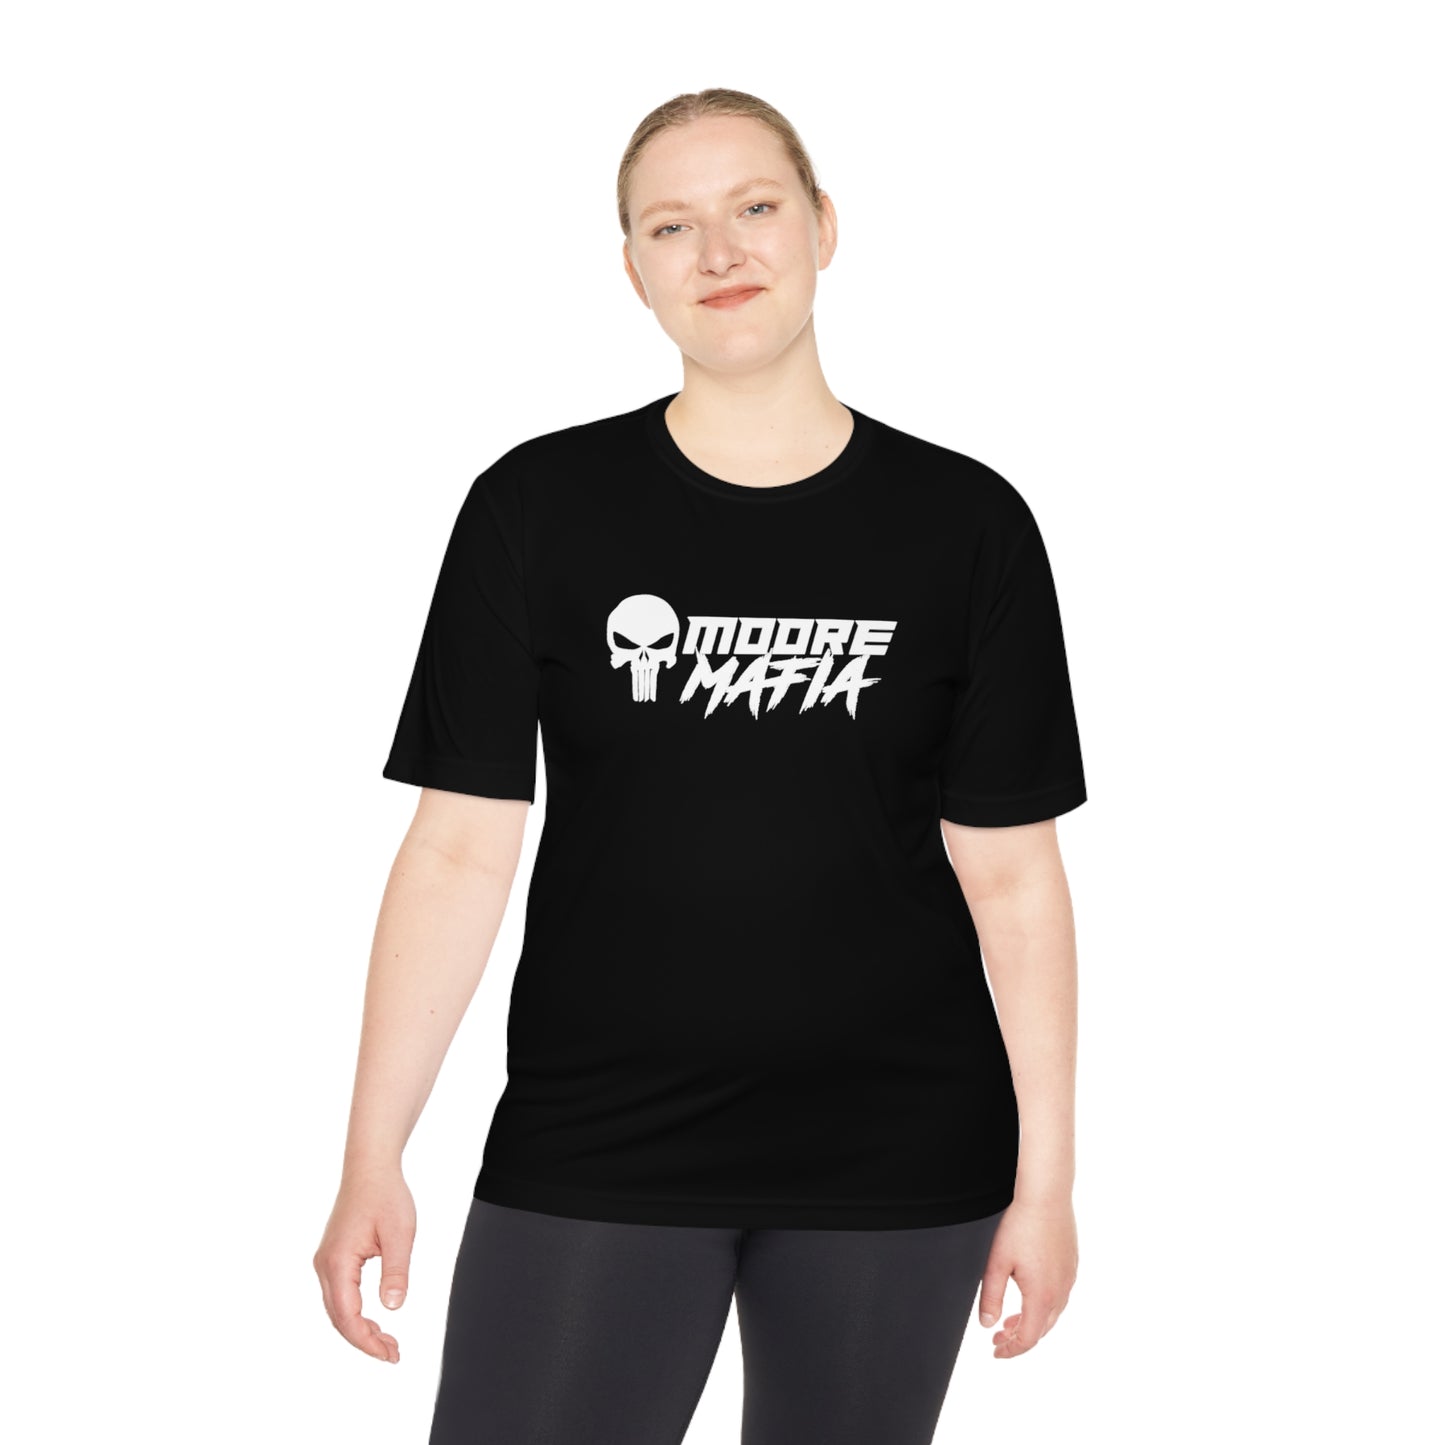 Tits Or Tires Unisex Moisture Wicking Tee